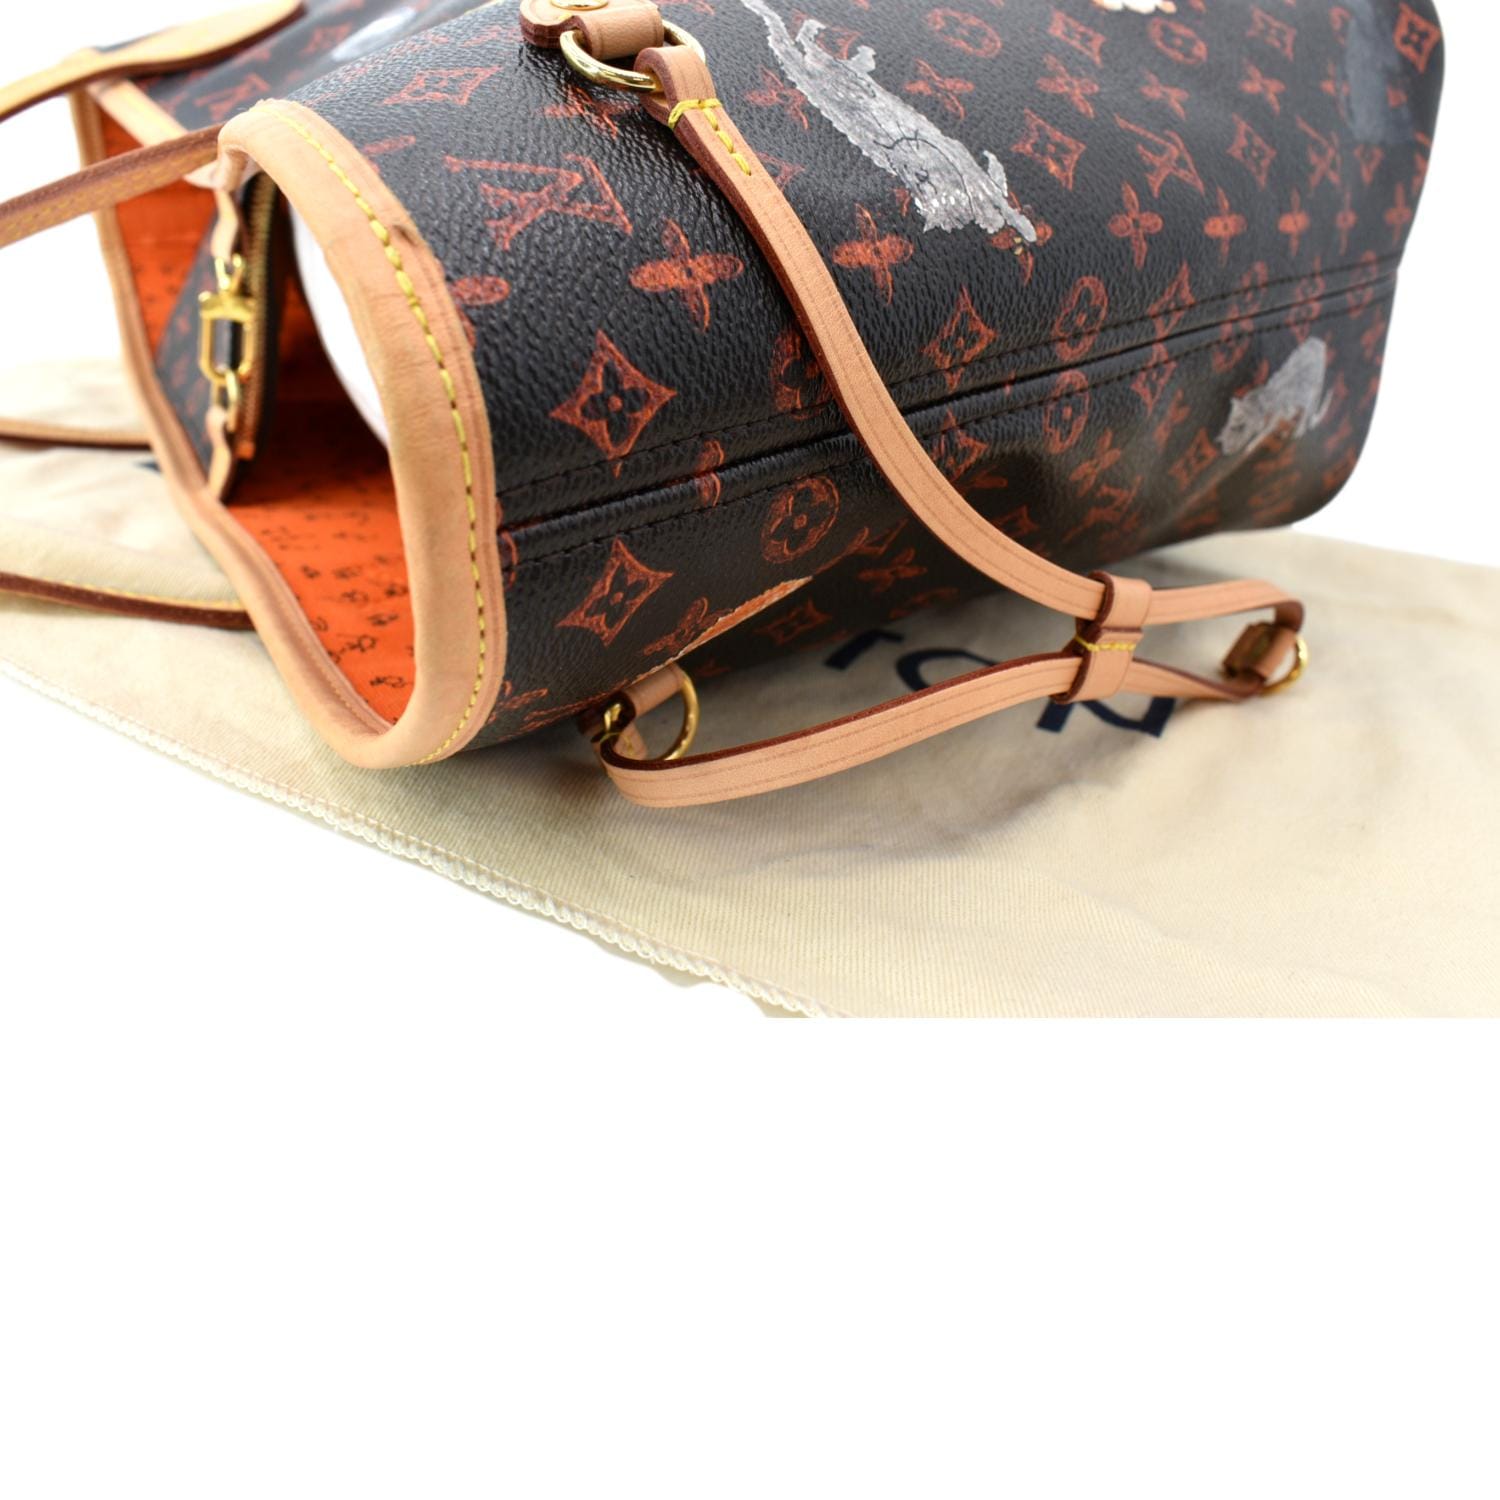 LOUIS VUITTON Catogram Neverfull MM Tote Bag Pouch M44441 Cat Animal New  receipt